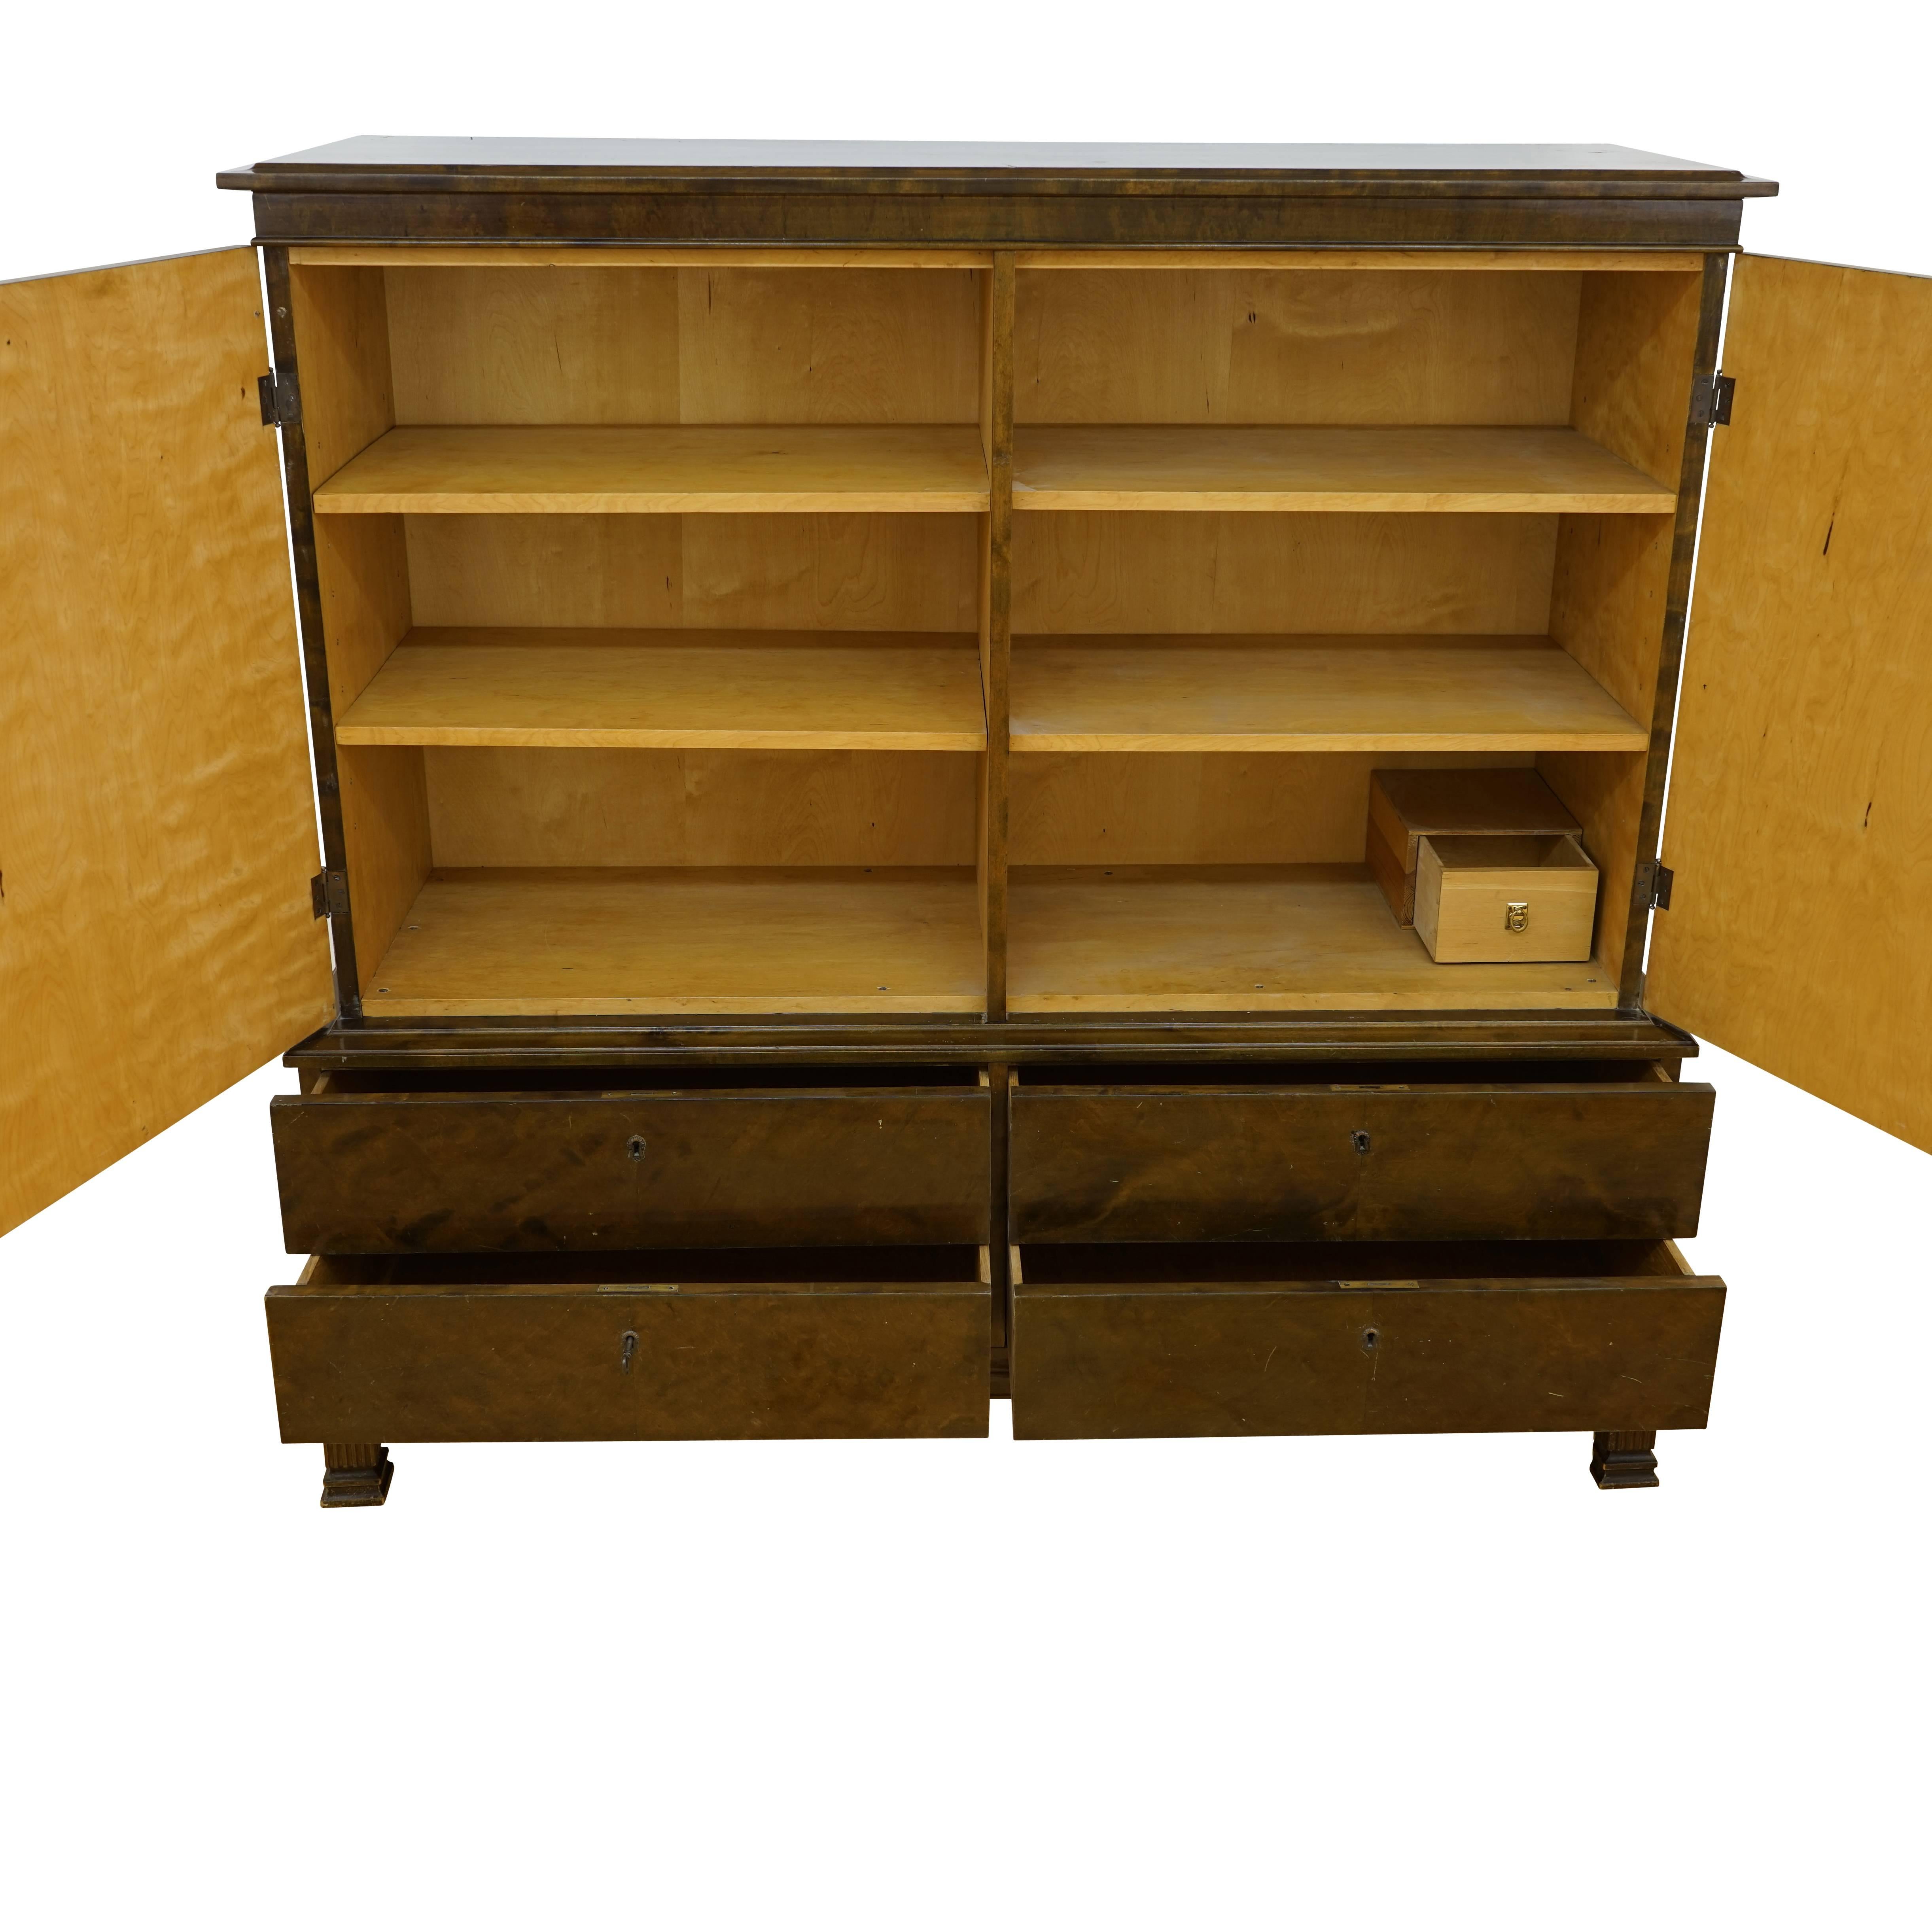 Need storage? Then this stately, geometric cabinet might be just what you desire. Four solid, sturdy shelves, originally used to store heavy and valuable china and crystal, divide the upper section. An integral inner drawer hides in the rear of the